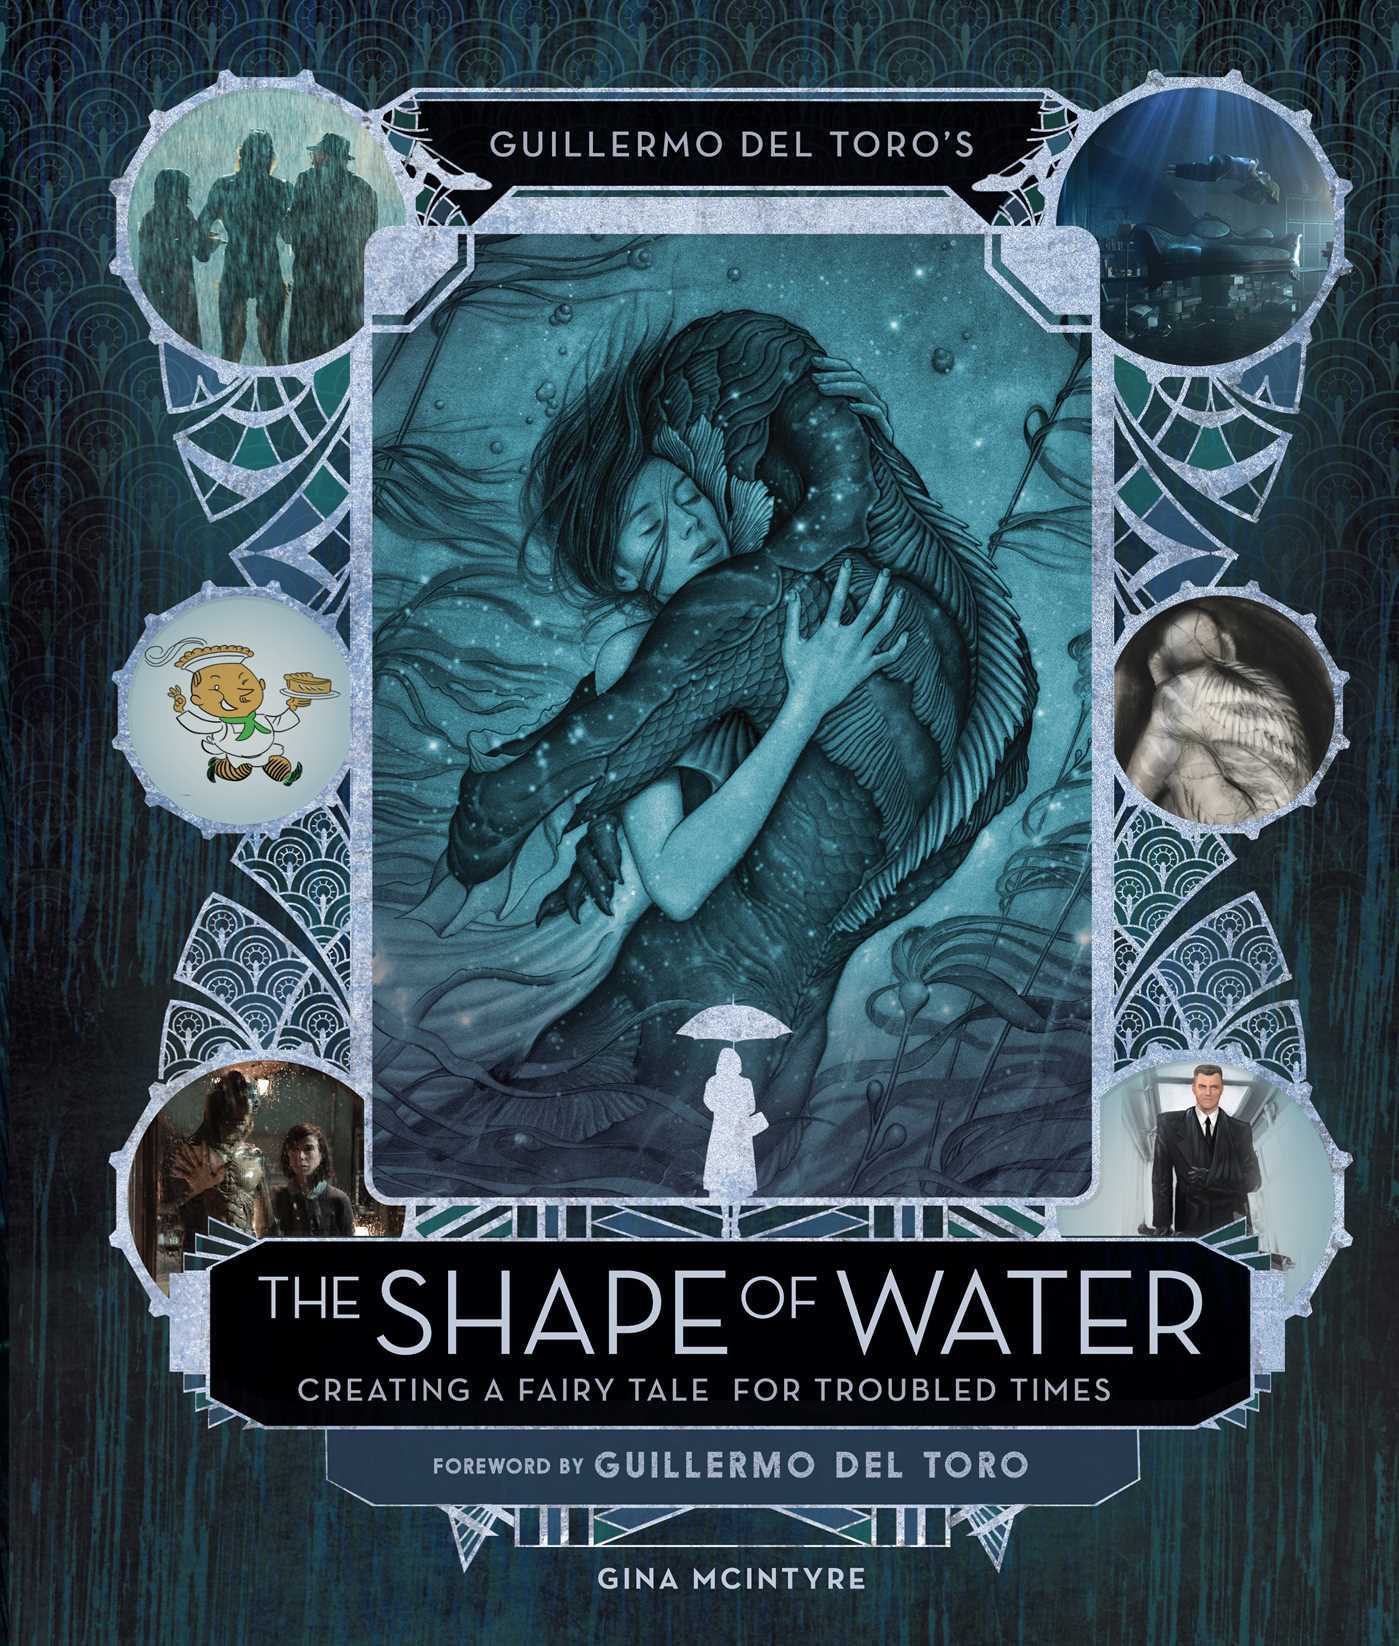 Fairy Tale Worksheets Along with Guillermo Del toro S the Shape Of Water